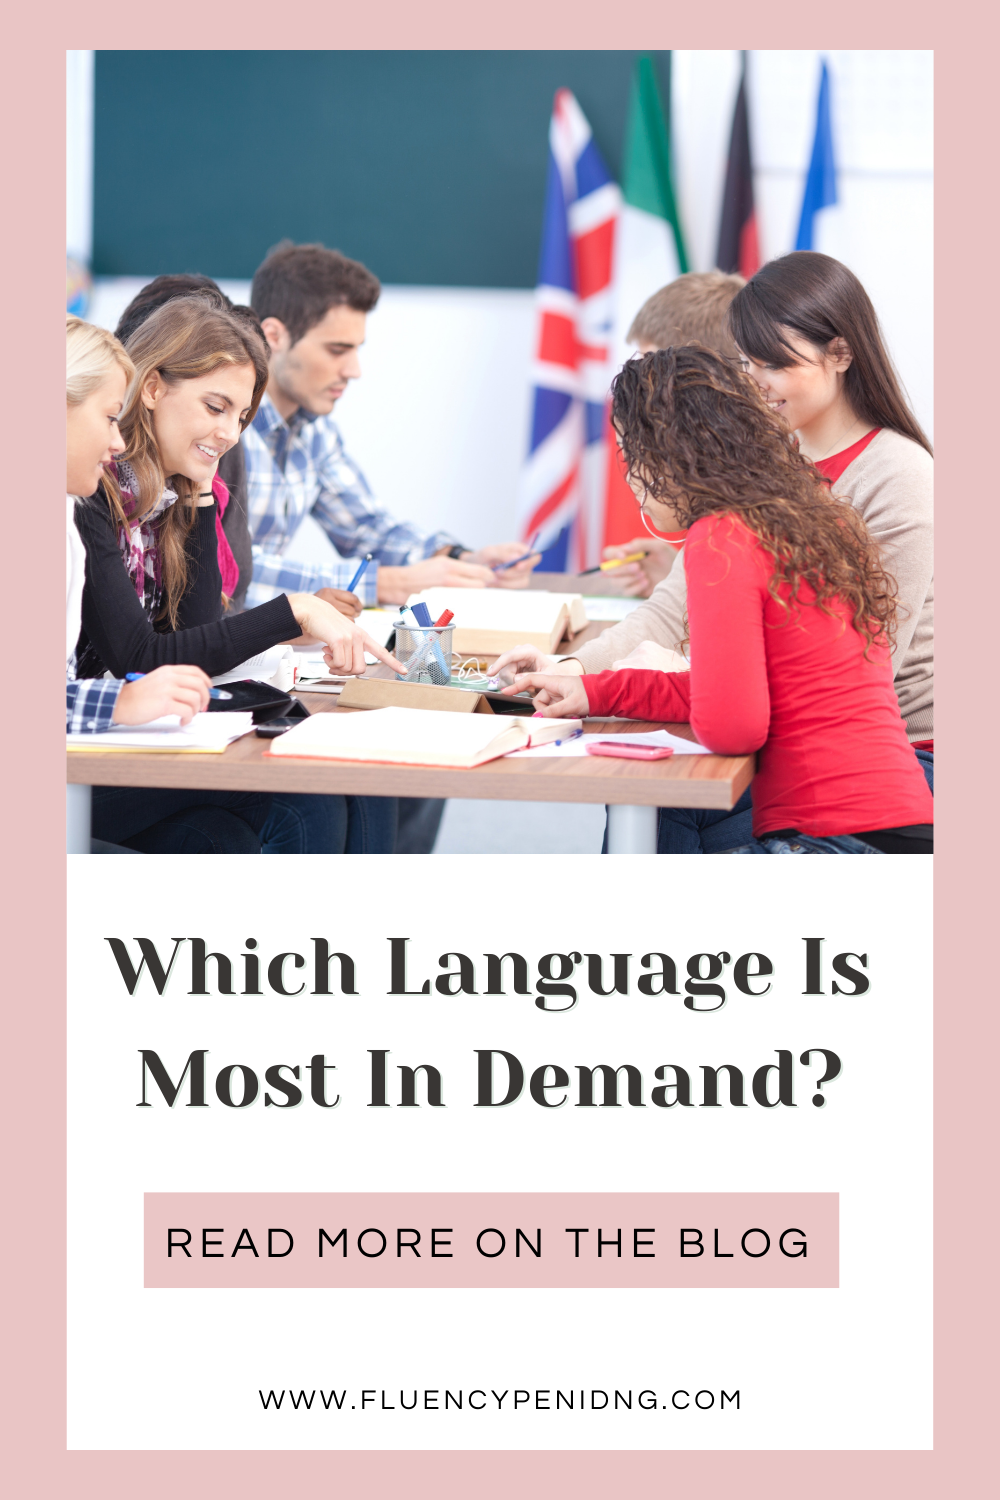 Which language is most in demand